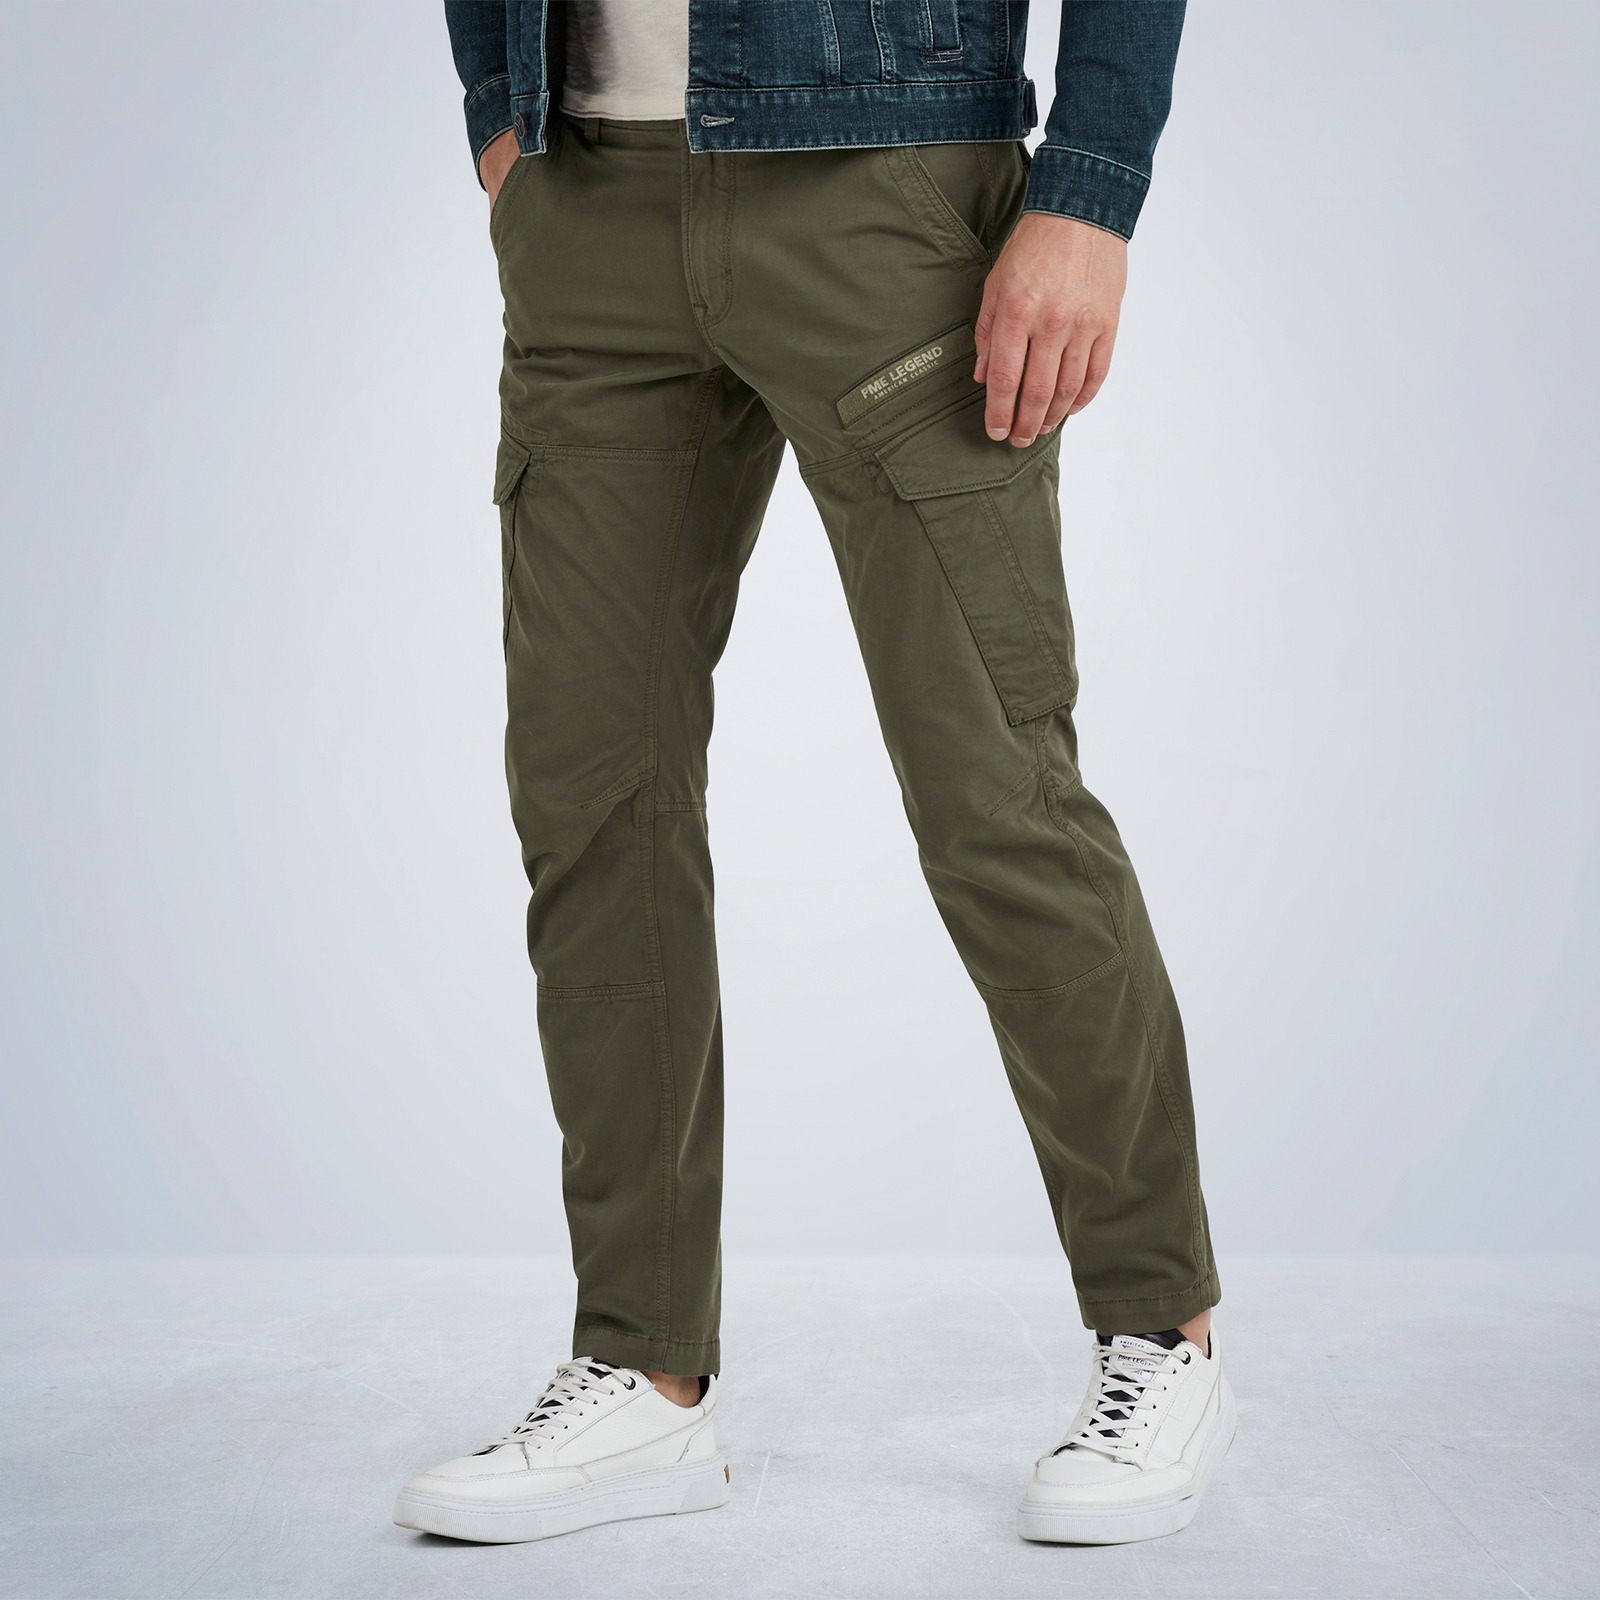 Free Cargohose Fit shipping Nordrop Tapered returns | PME | and LEGEND